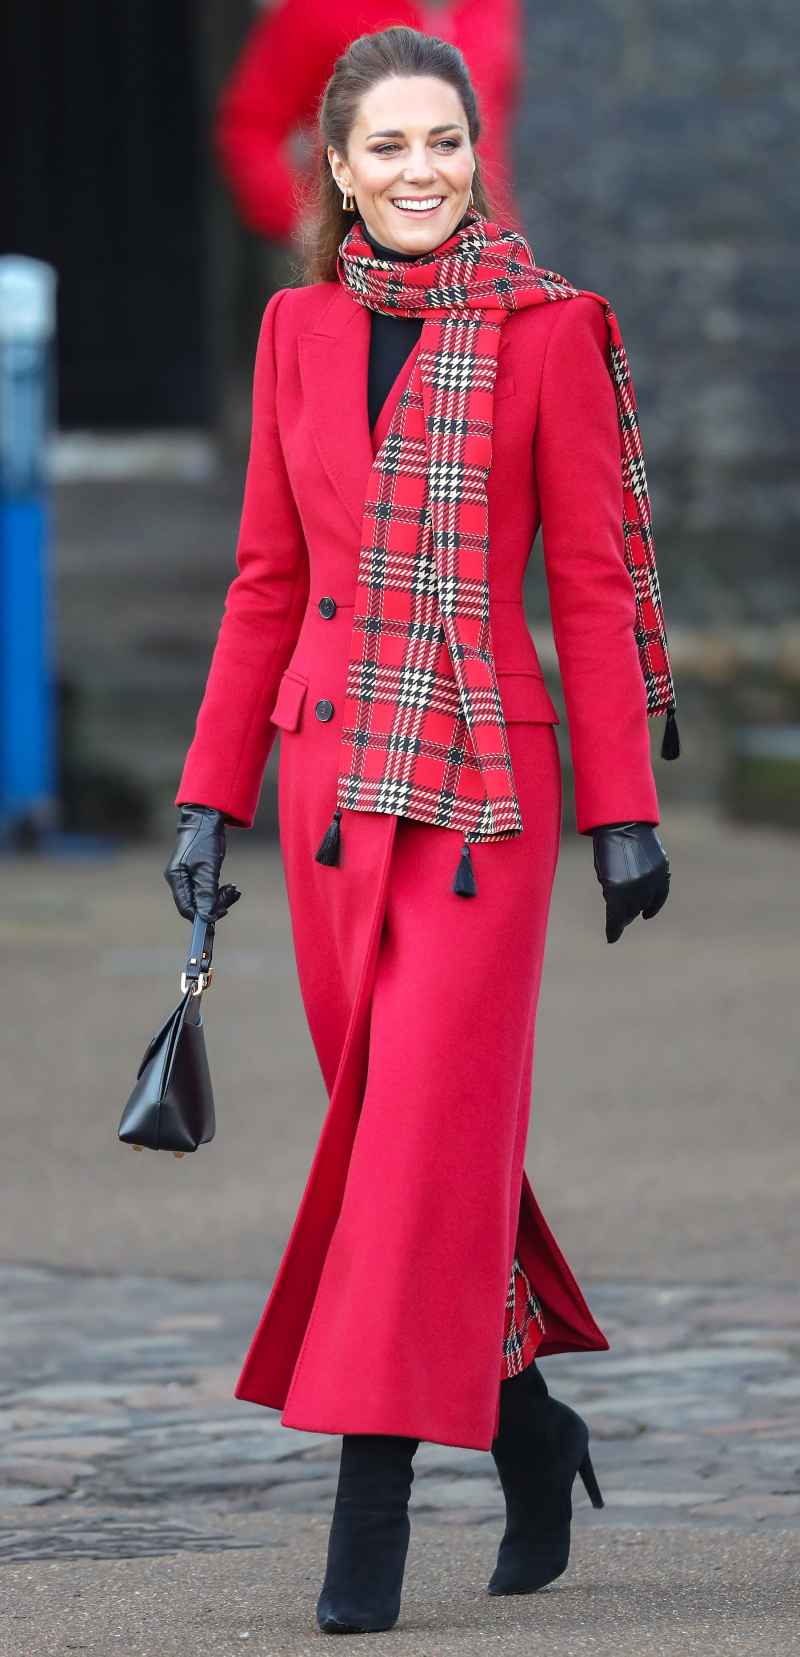 Duchess Kate Is the Chicest Holiday Princess in a Sleek Red Coat and Scarf